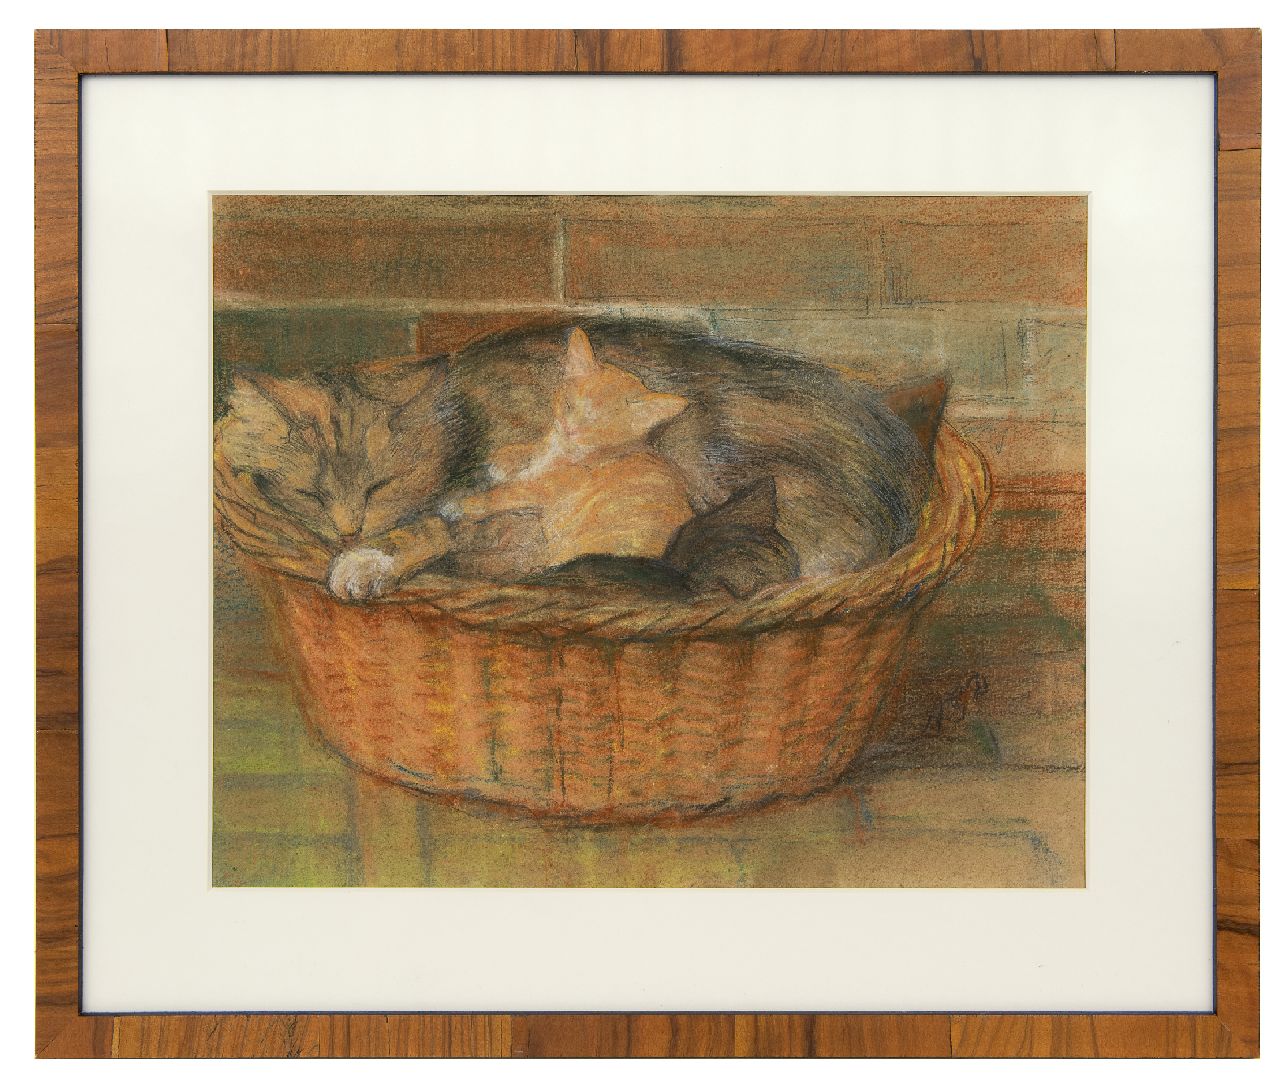 Dyserinck A.G.  | Adrienne Gertrude 'Attie' Dyserinck, Sleeping cat and kittens in a basket, pastel on paper 31.9 x 40.0 cm, signed l.r. with initials